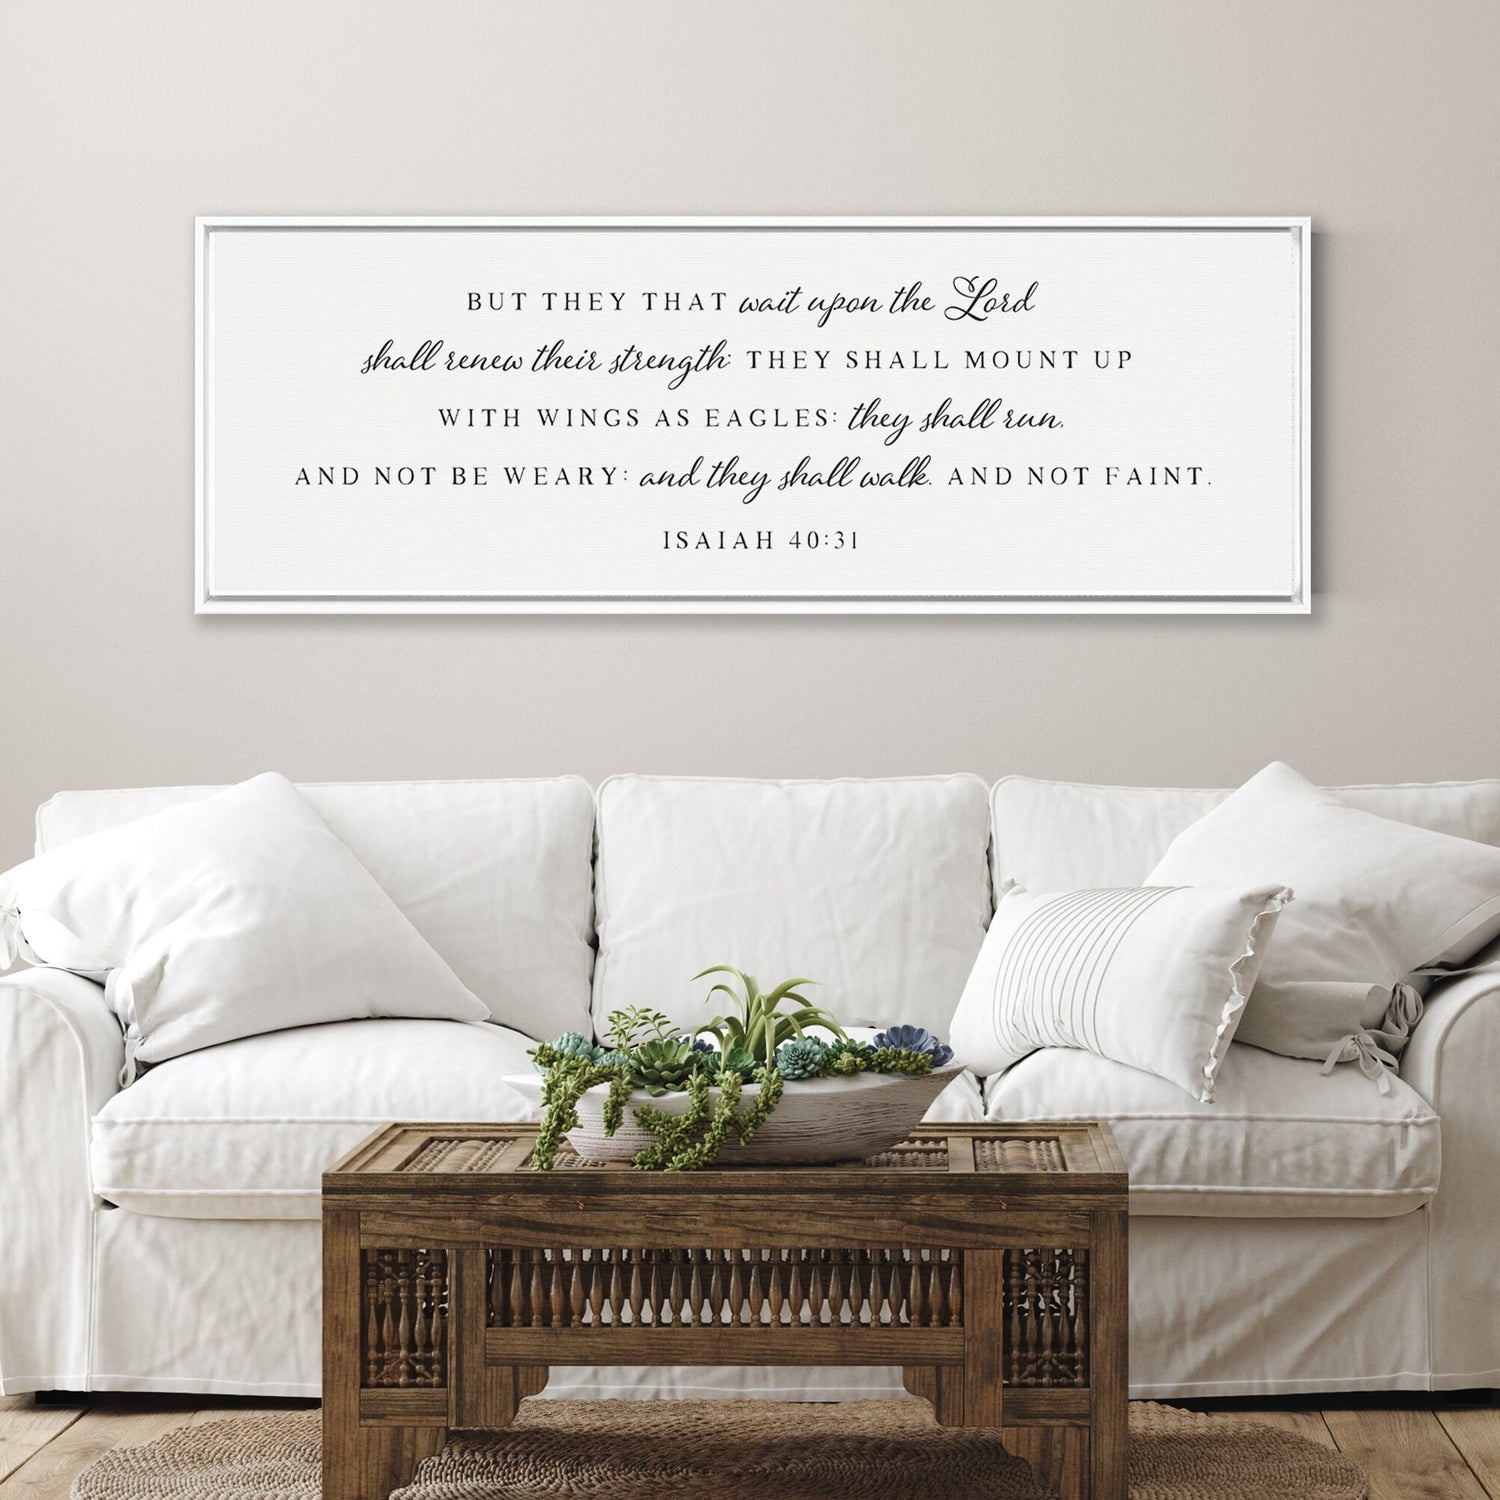 But They That Wait Upon The Lord | Scripture Sign | Christian Wall Decor | Bible Verse Wall Art Sign | Isaiah 40:31 | With Frame Options